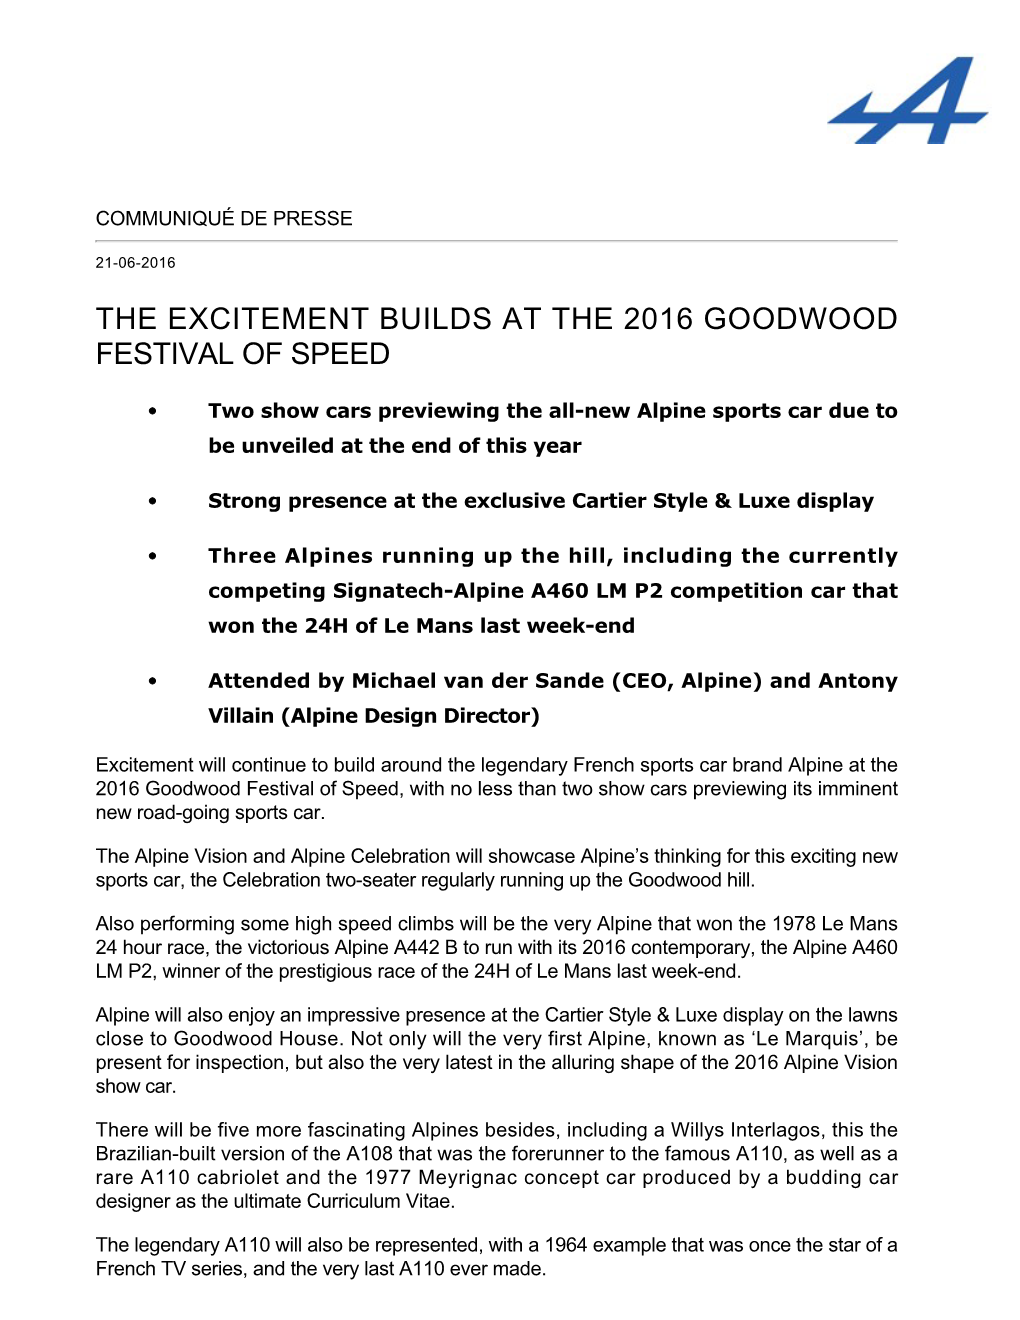 The Excitement Builds at the 2016 Goodwood Festival of Speed